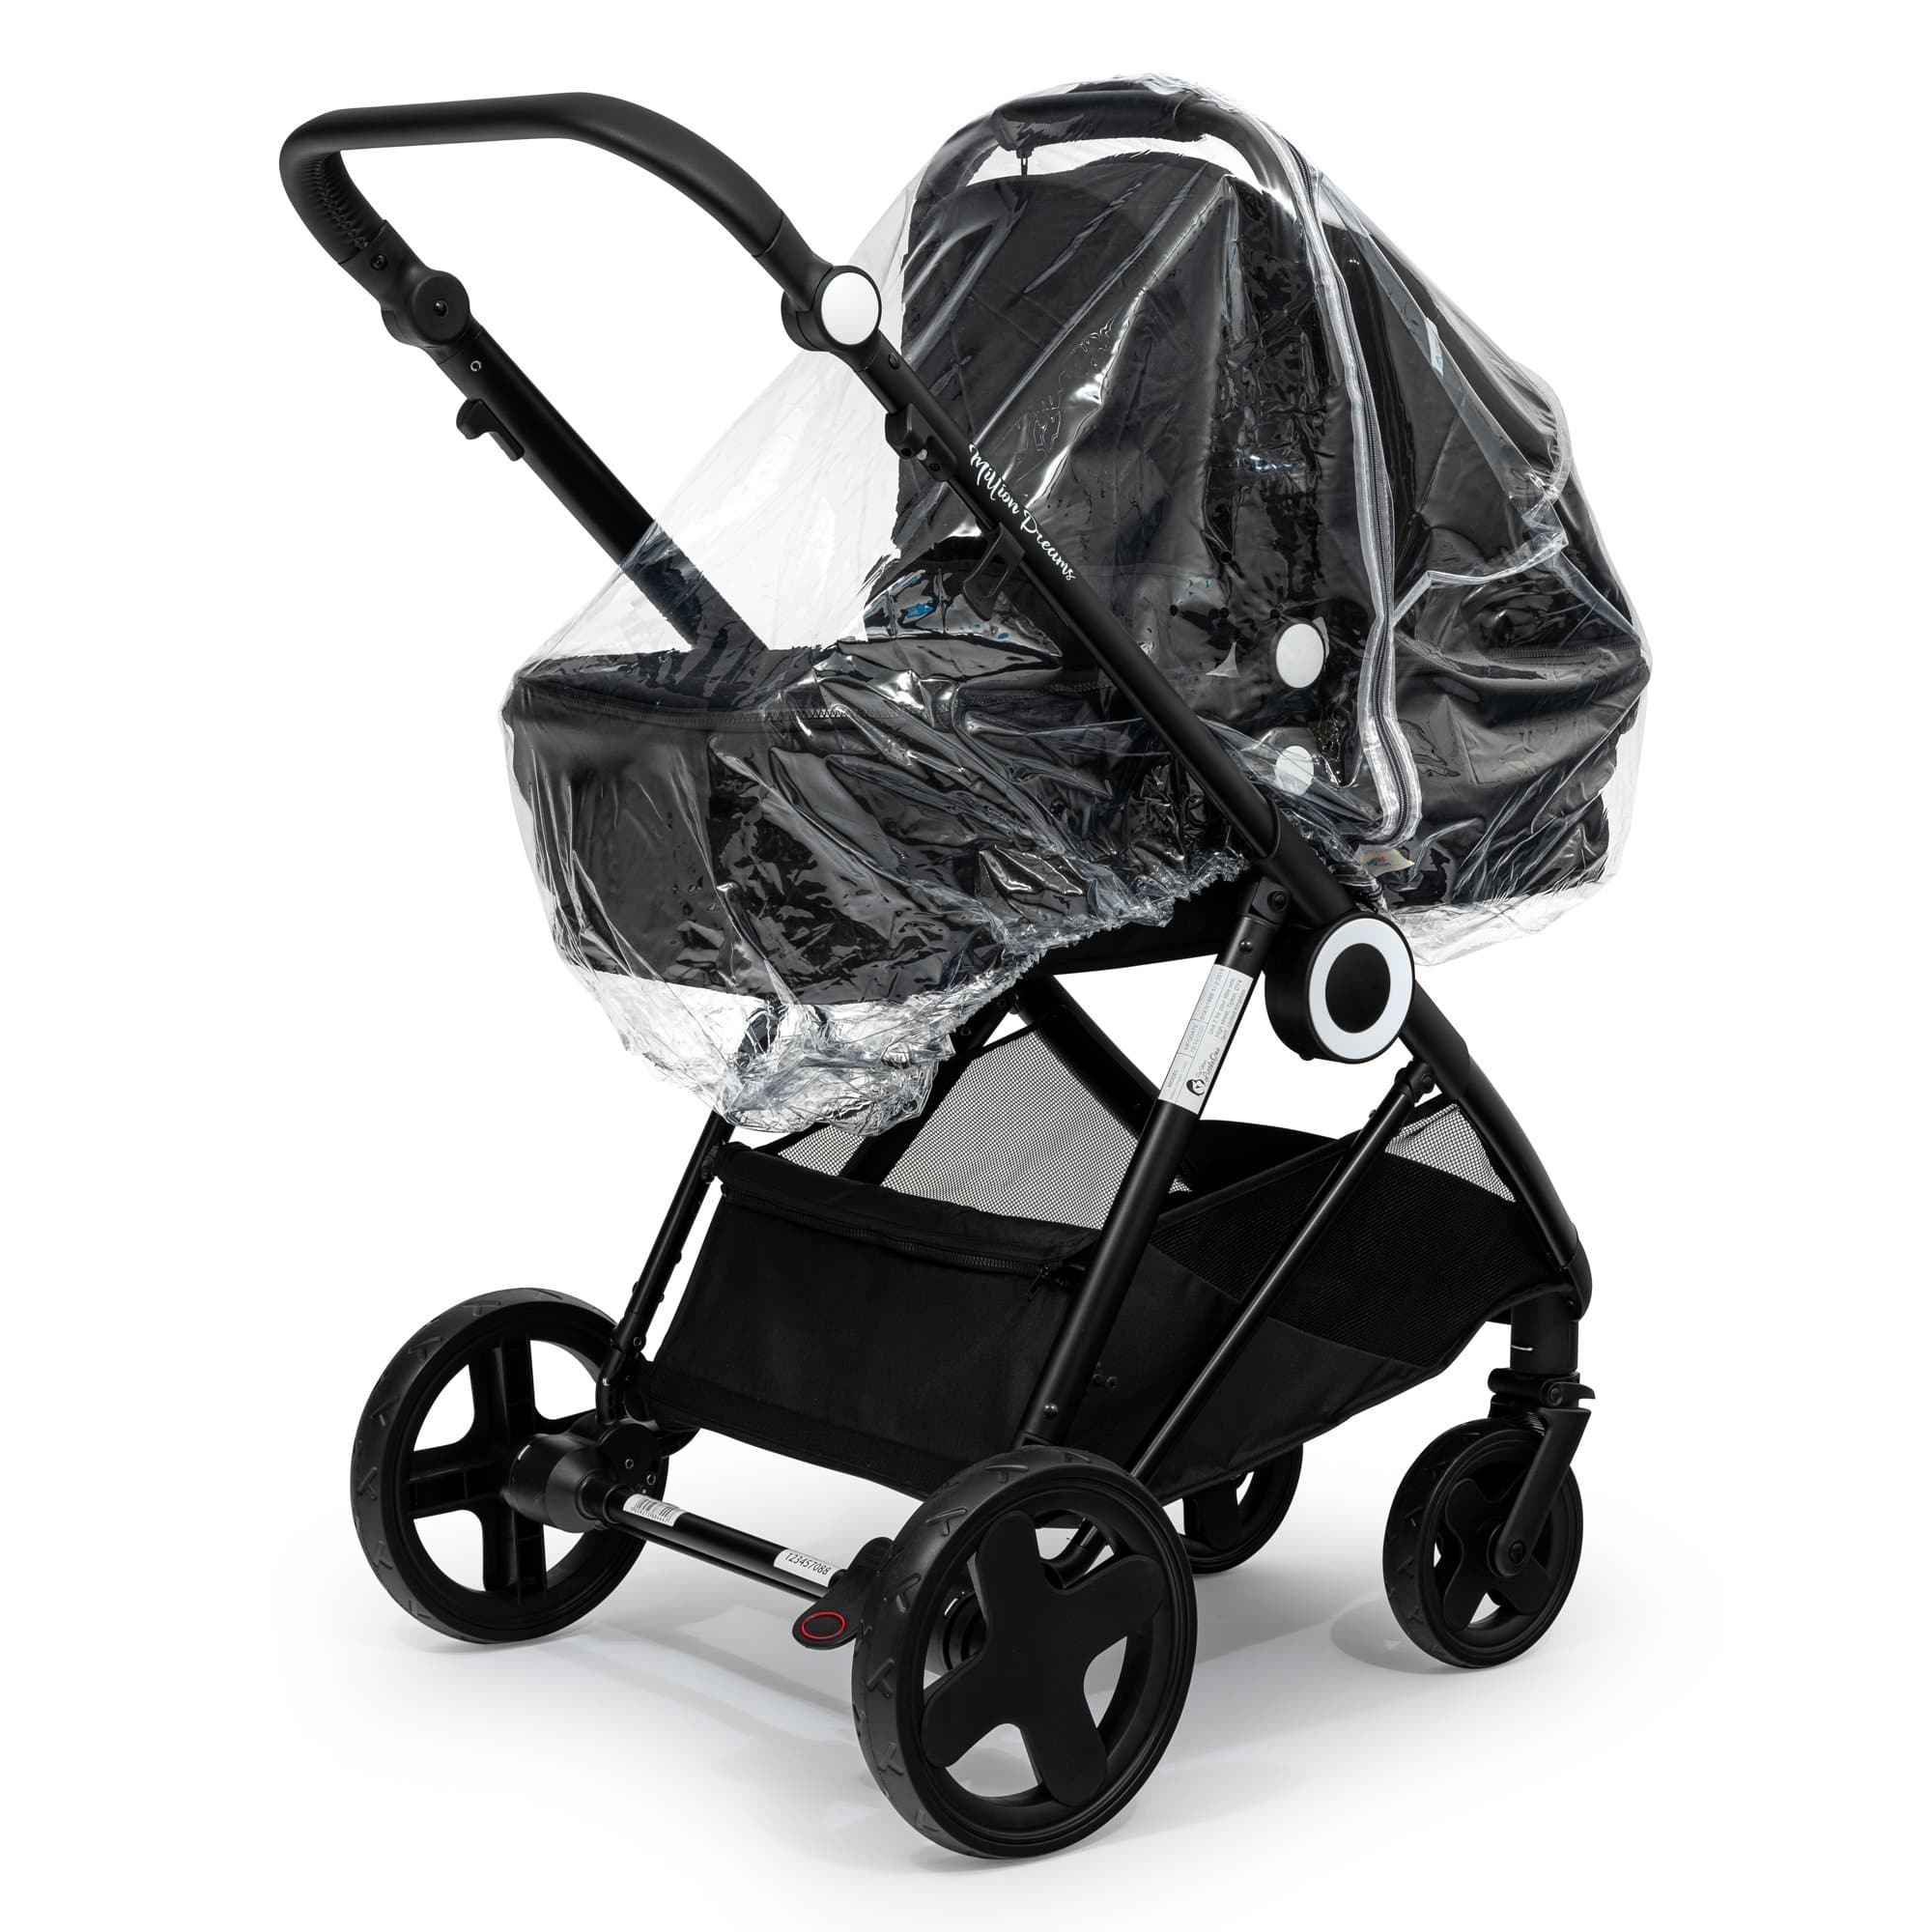 2 in 1 Rain Cover Compatible with Baby Weavers - Fits All Models - For Your Little One